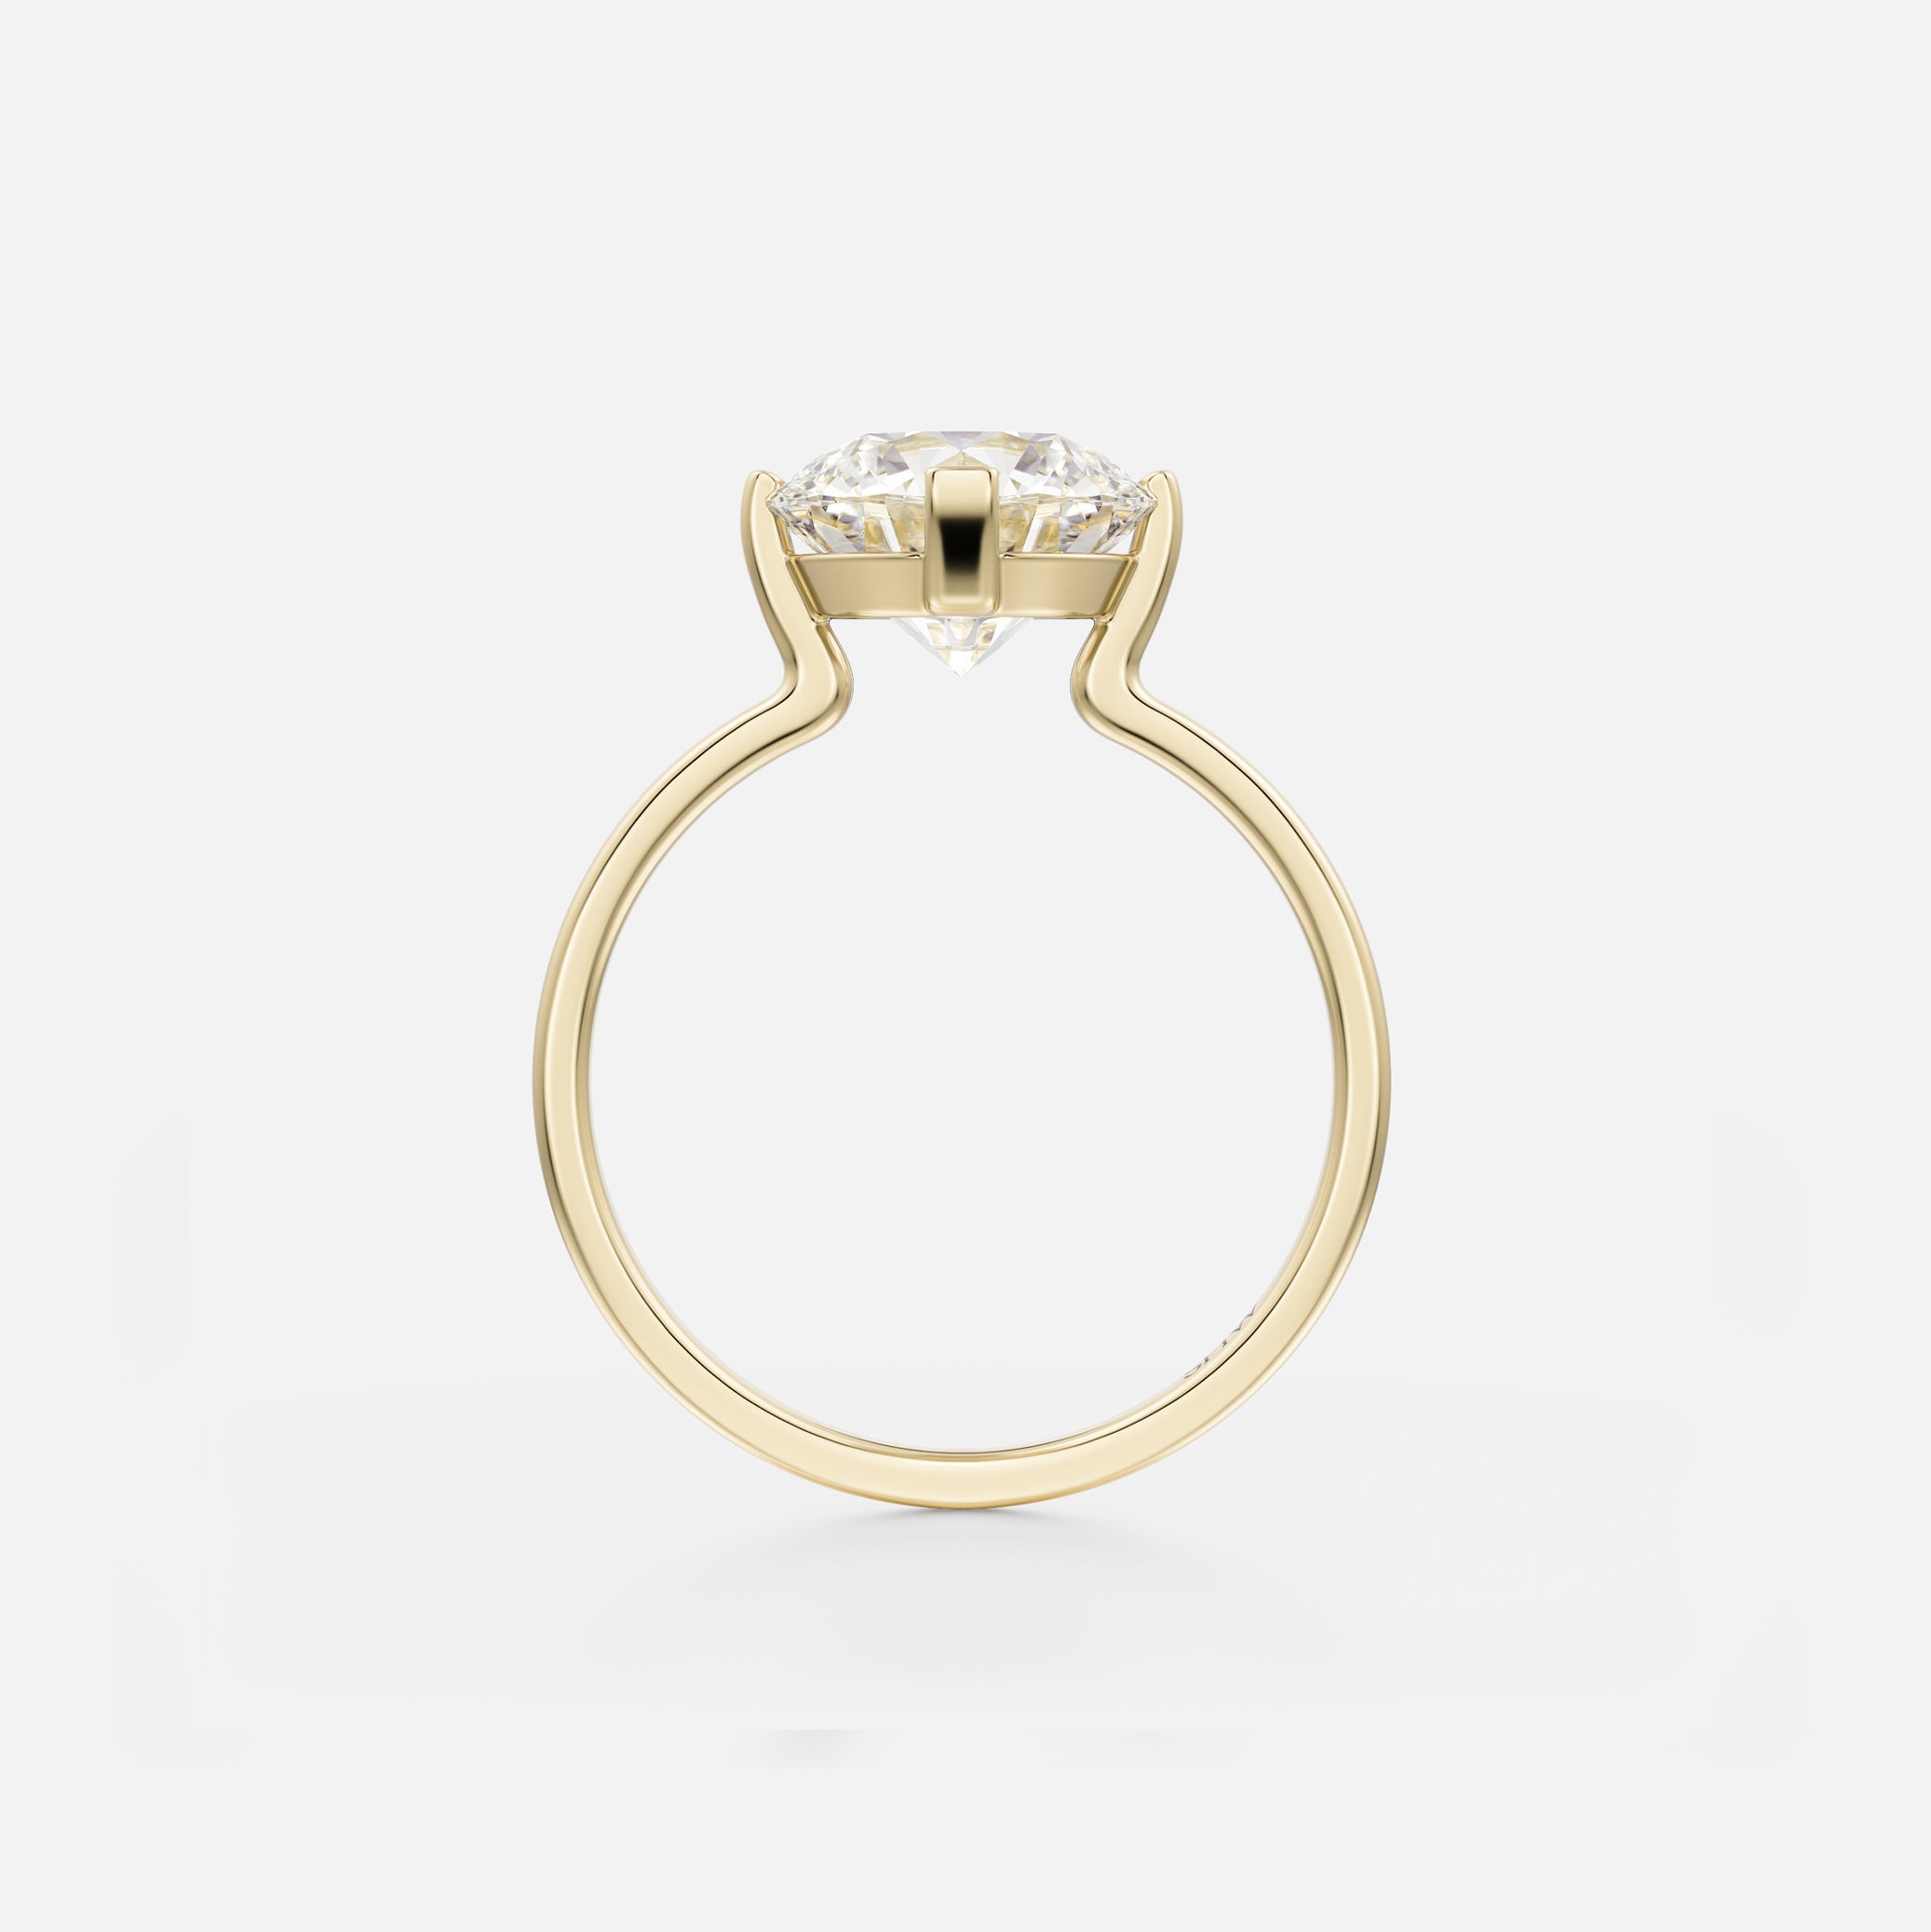 Ema Flat Band with Round Modern Engagement Ring Setting in recycled, sustainable 14k yellow, white or rose Gold or platinum by SHW Fine Jewelry NYC